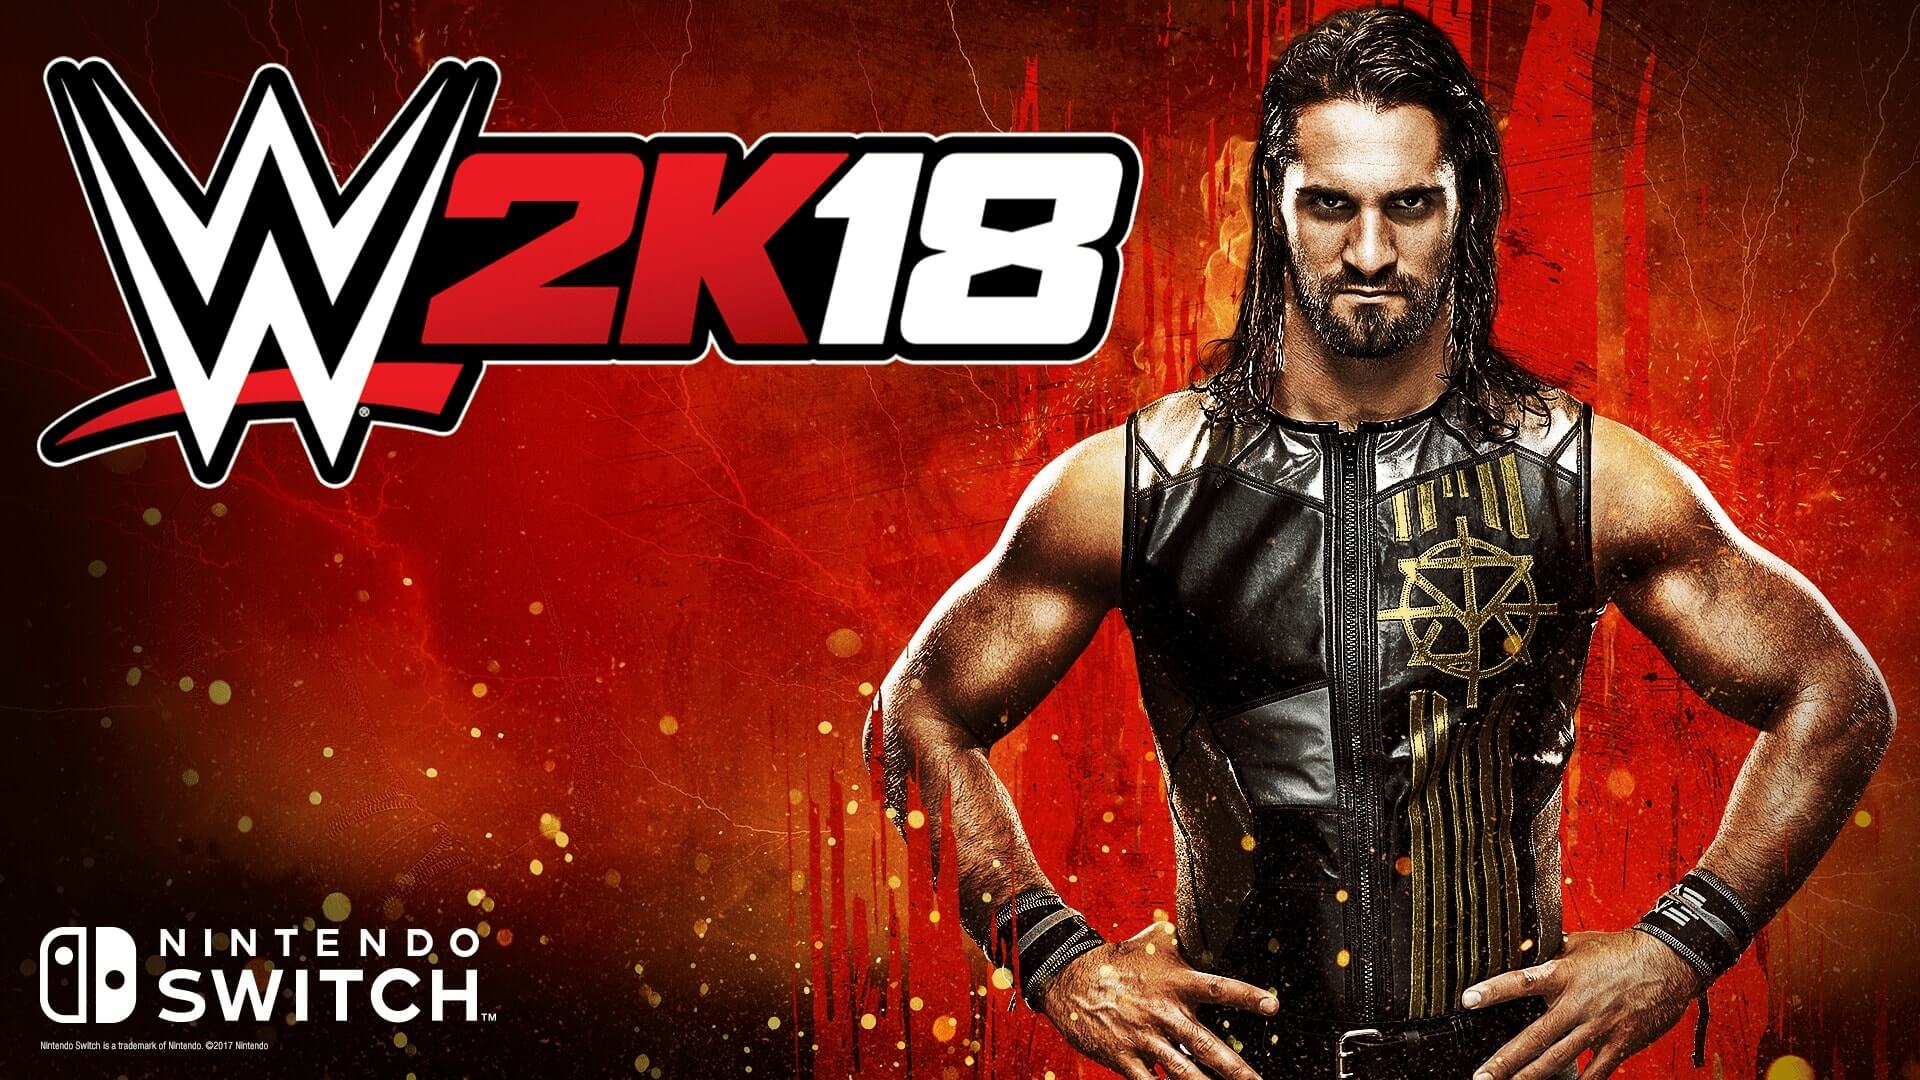 Image for WWE 2K18 is coming to Nintendo Switch [Update]